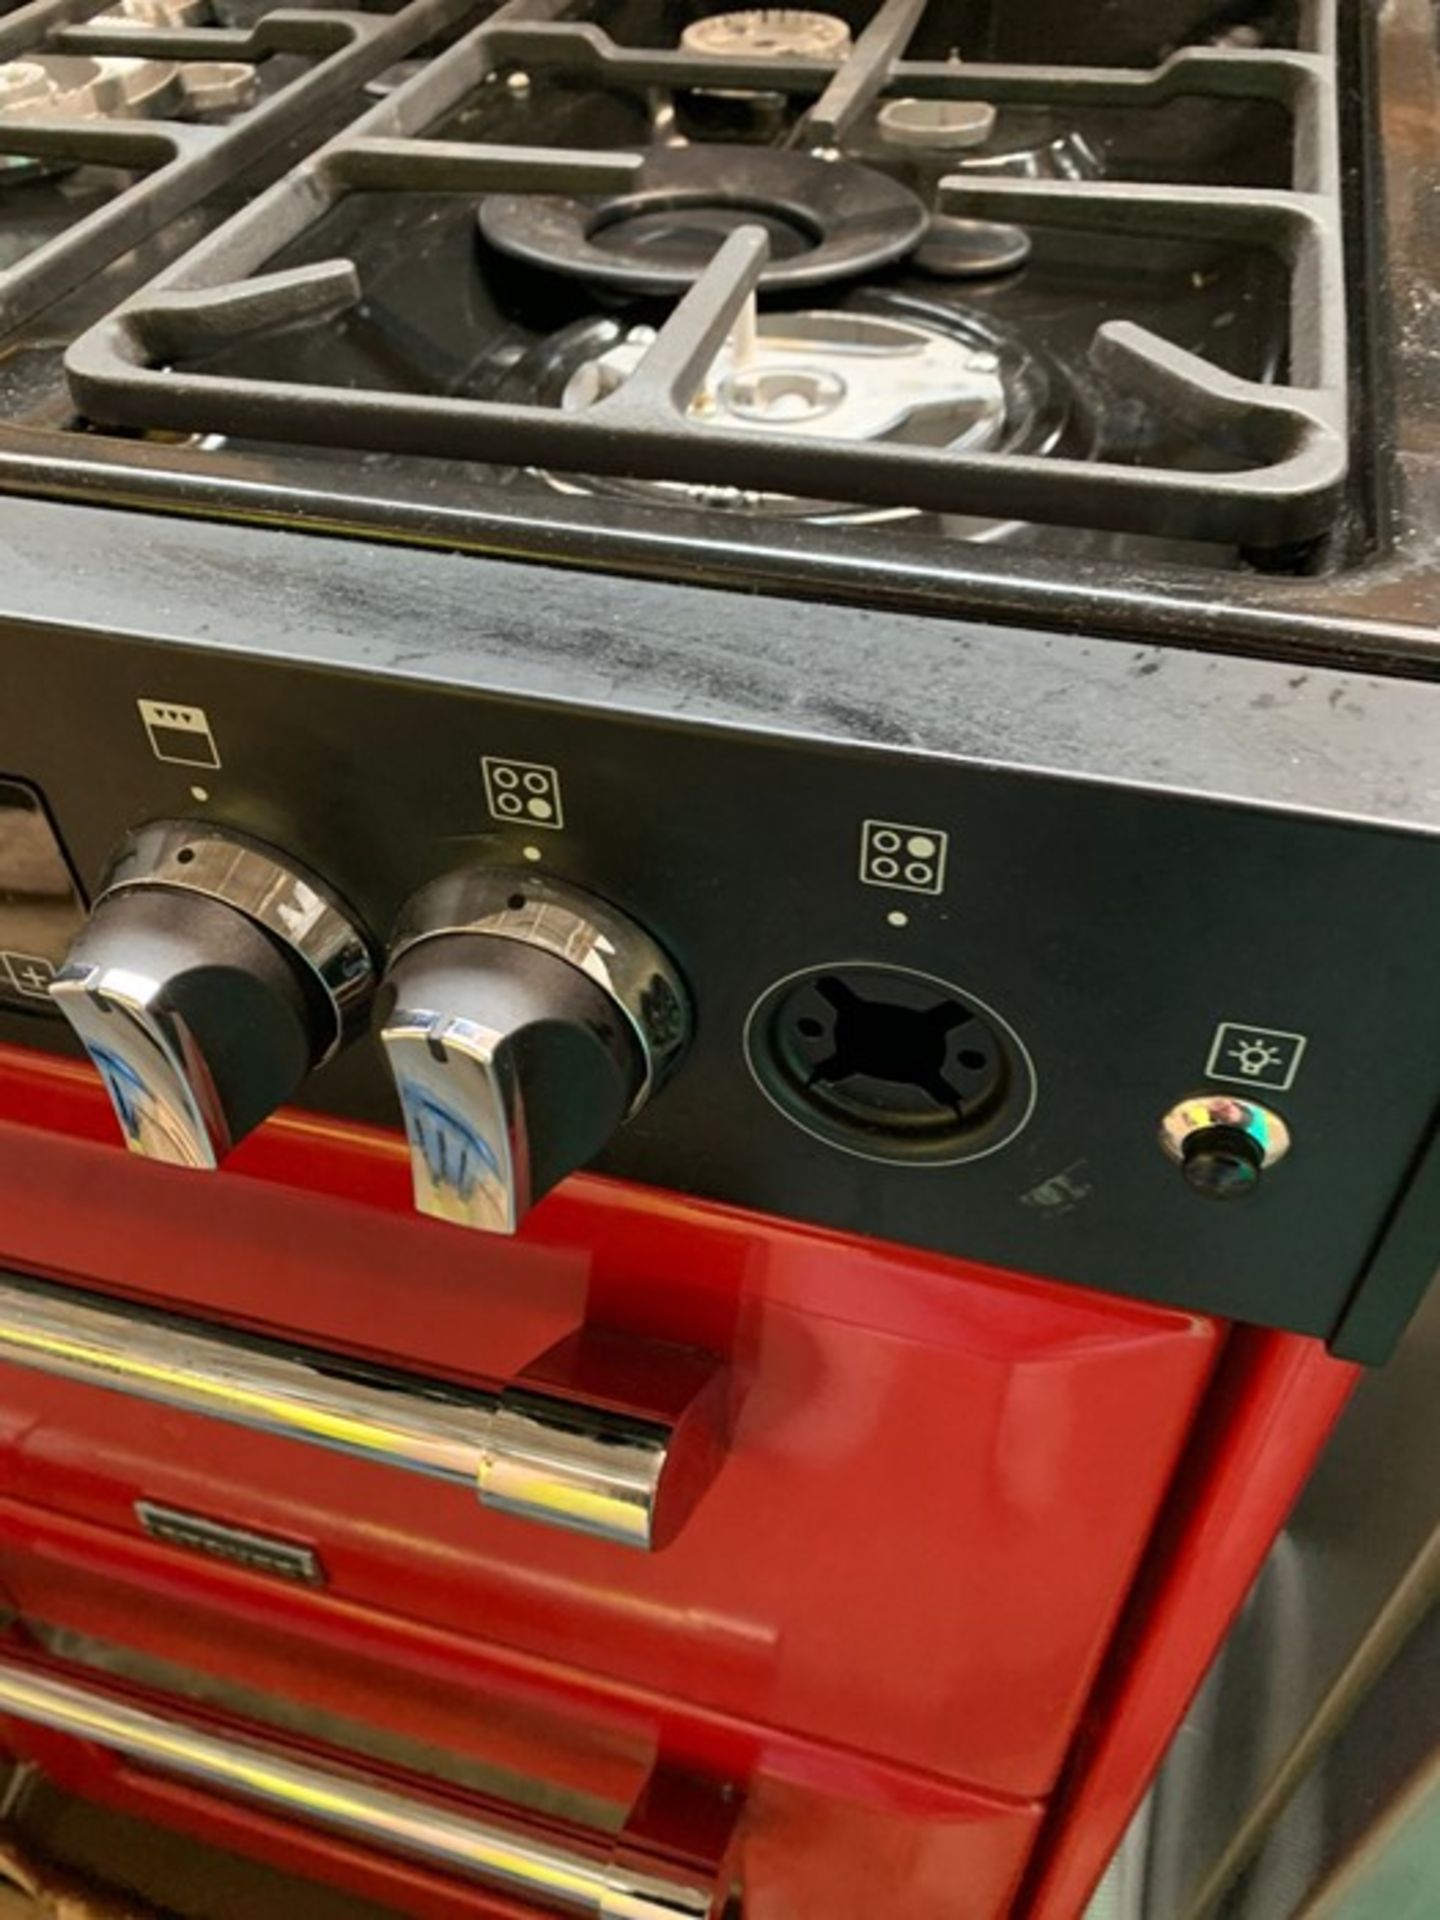 STOVES RICHMOND 600G GAS RANGE COOKER, RED - Image 3 of 5